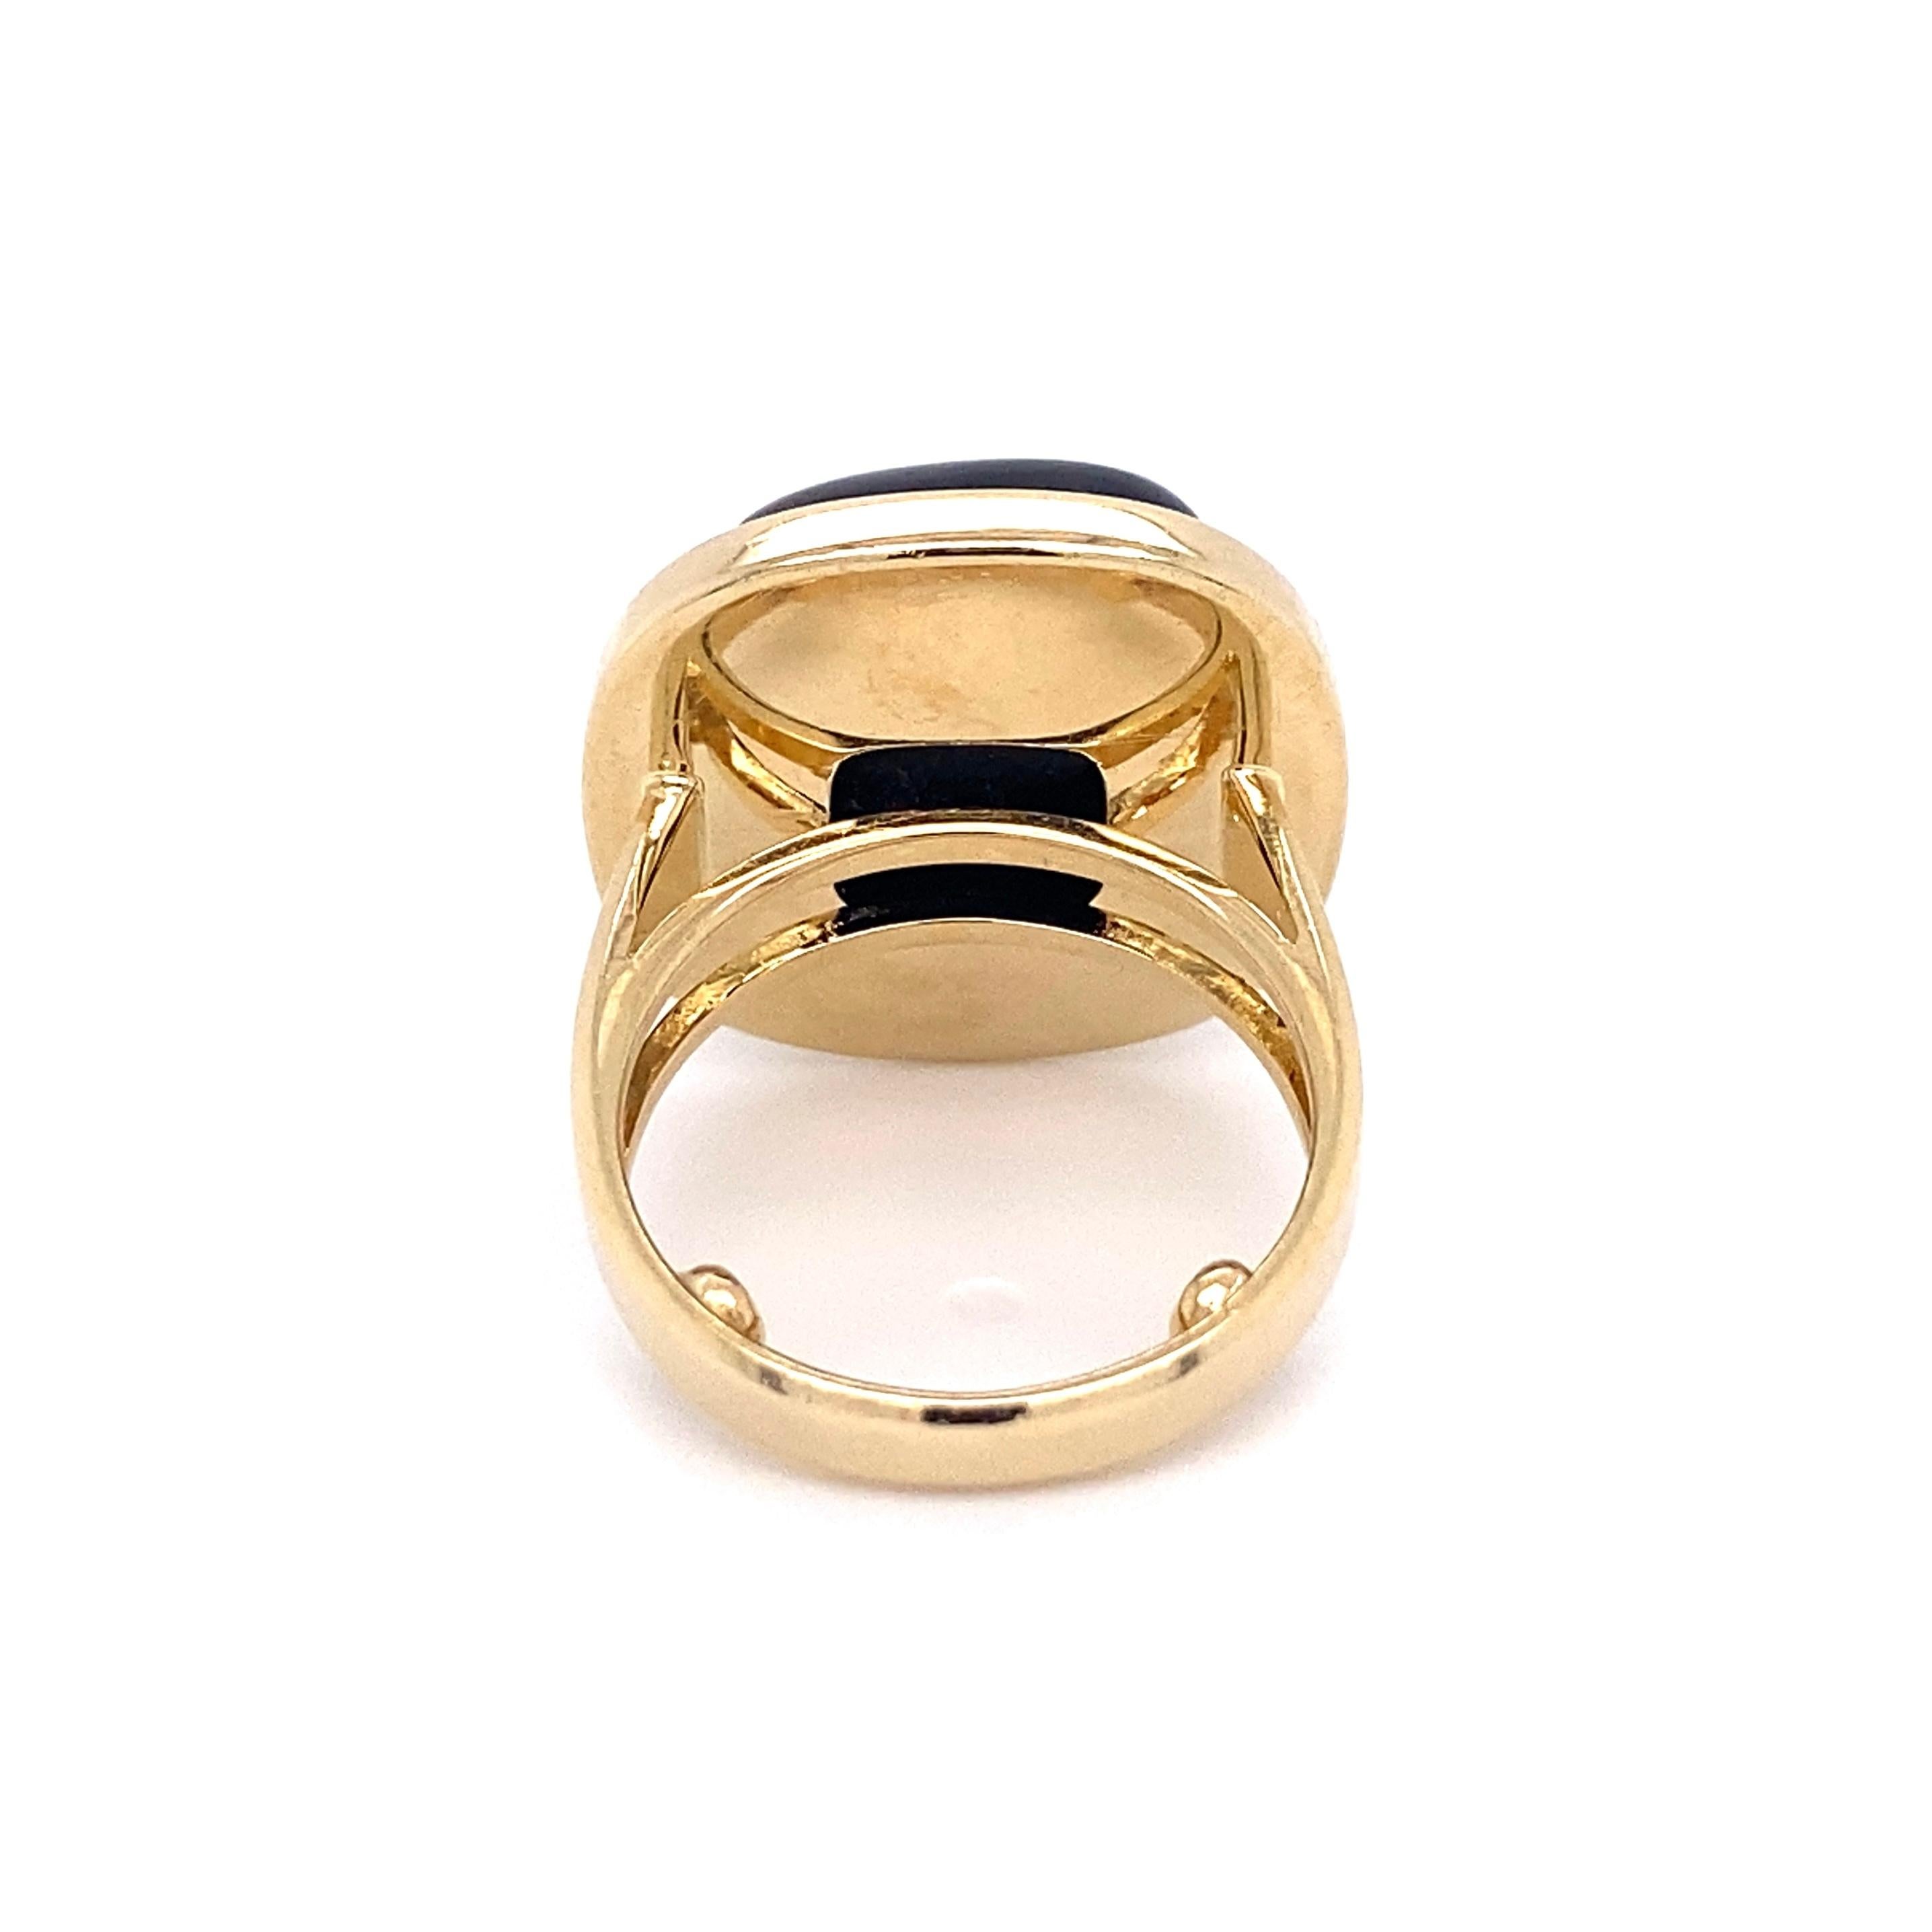 Cushion Cut Men’s Cushion Shape Onyx Dome Gold Signet Ring Estate Fine Jewelry For Sale